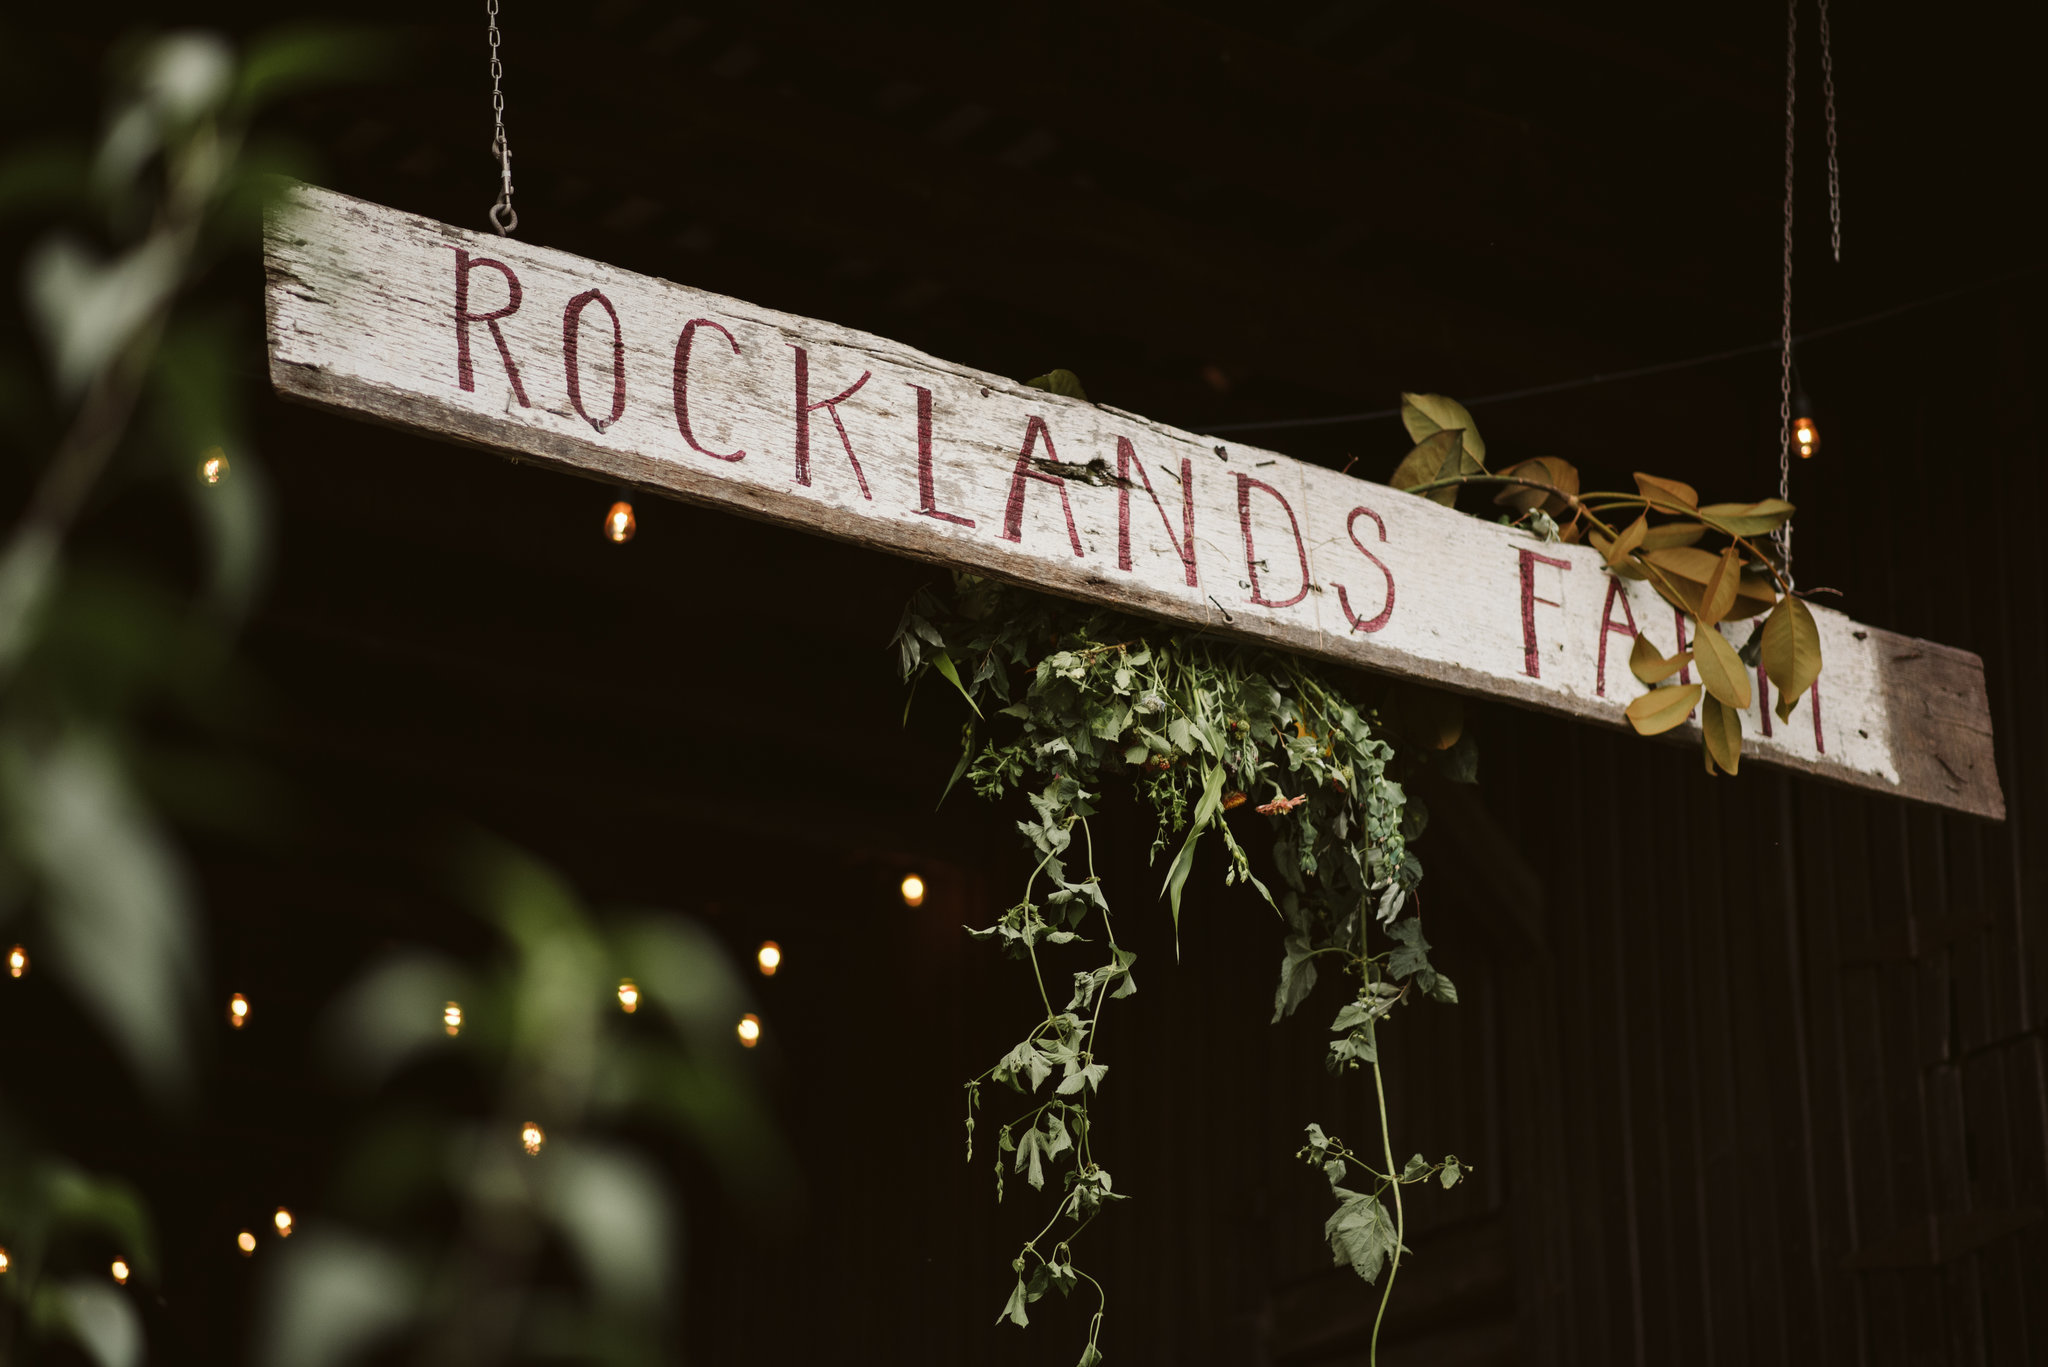 Rocklands Farm, Maryland, Intimate Wedding, Baltimore Wedding Photographer, Sungold Flower Co, Rustic, Romantic, Barn Wedding, Hand Painted Sign Hanging